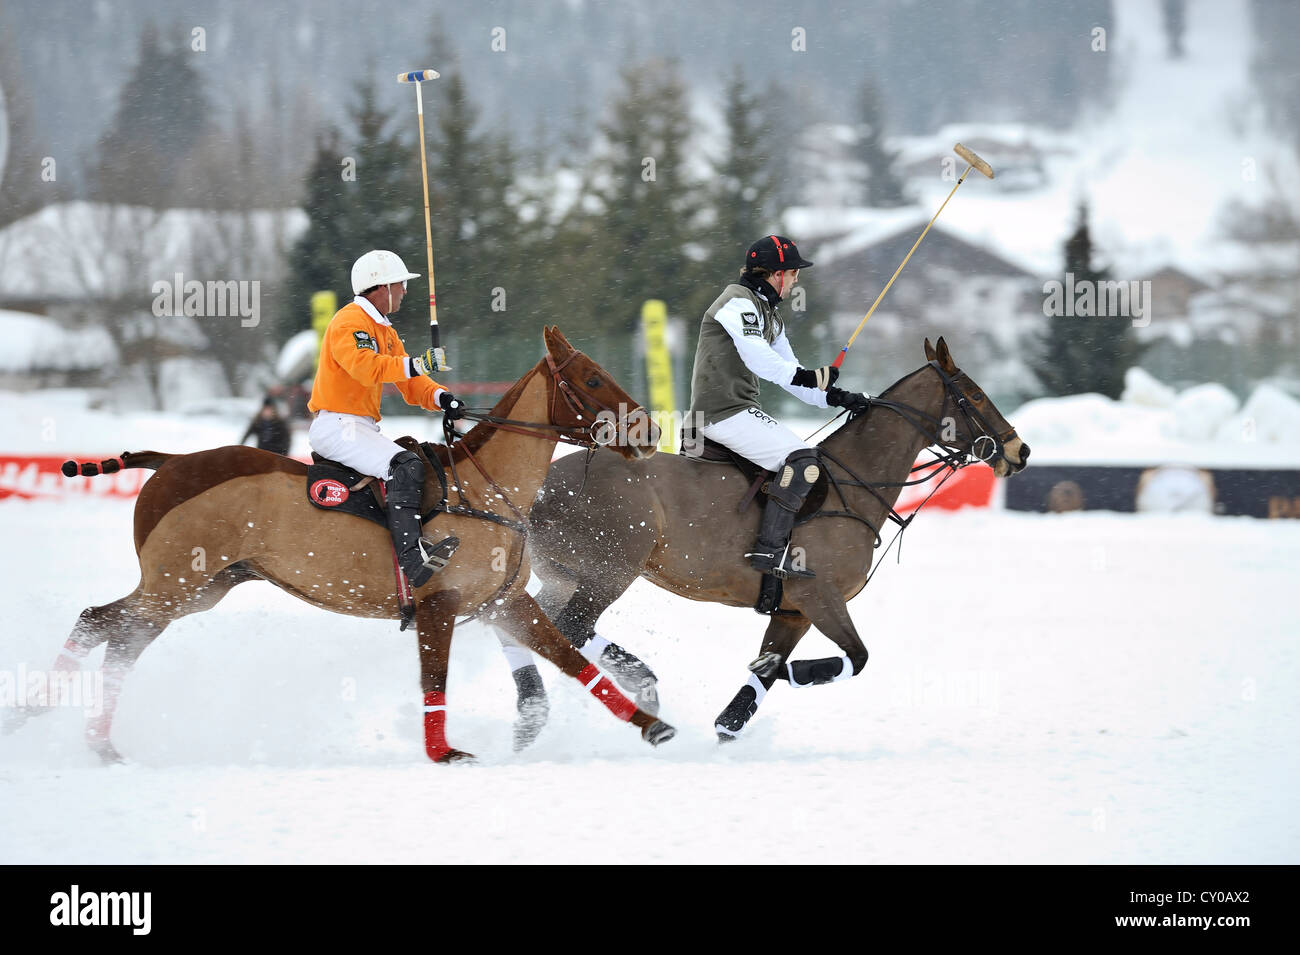 Two polo players galloping through the snow, Tarquin Southwell of team 'Hawker Beechkraft' followed by Francisco Podesta of team Stock Photo